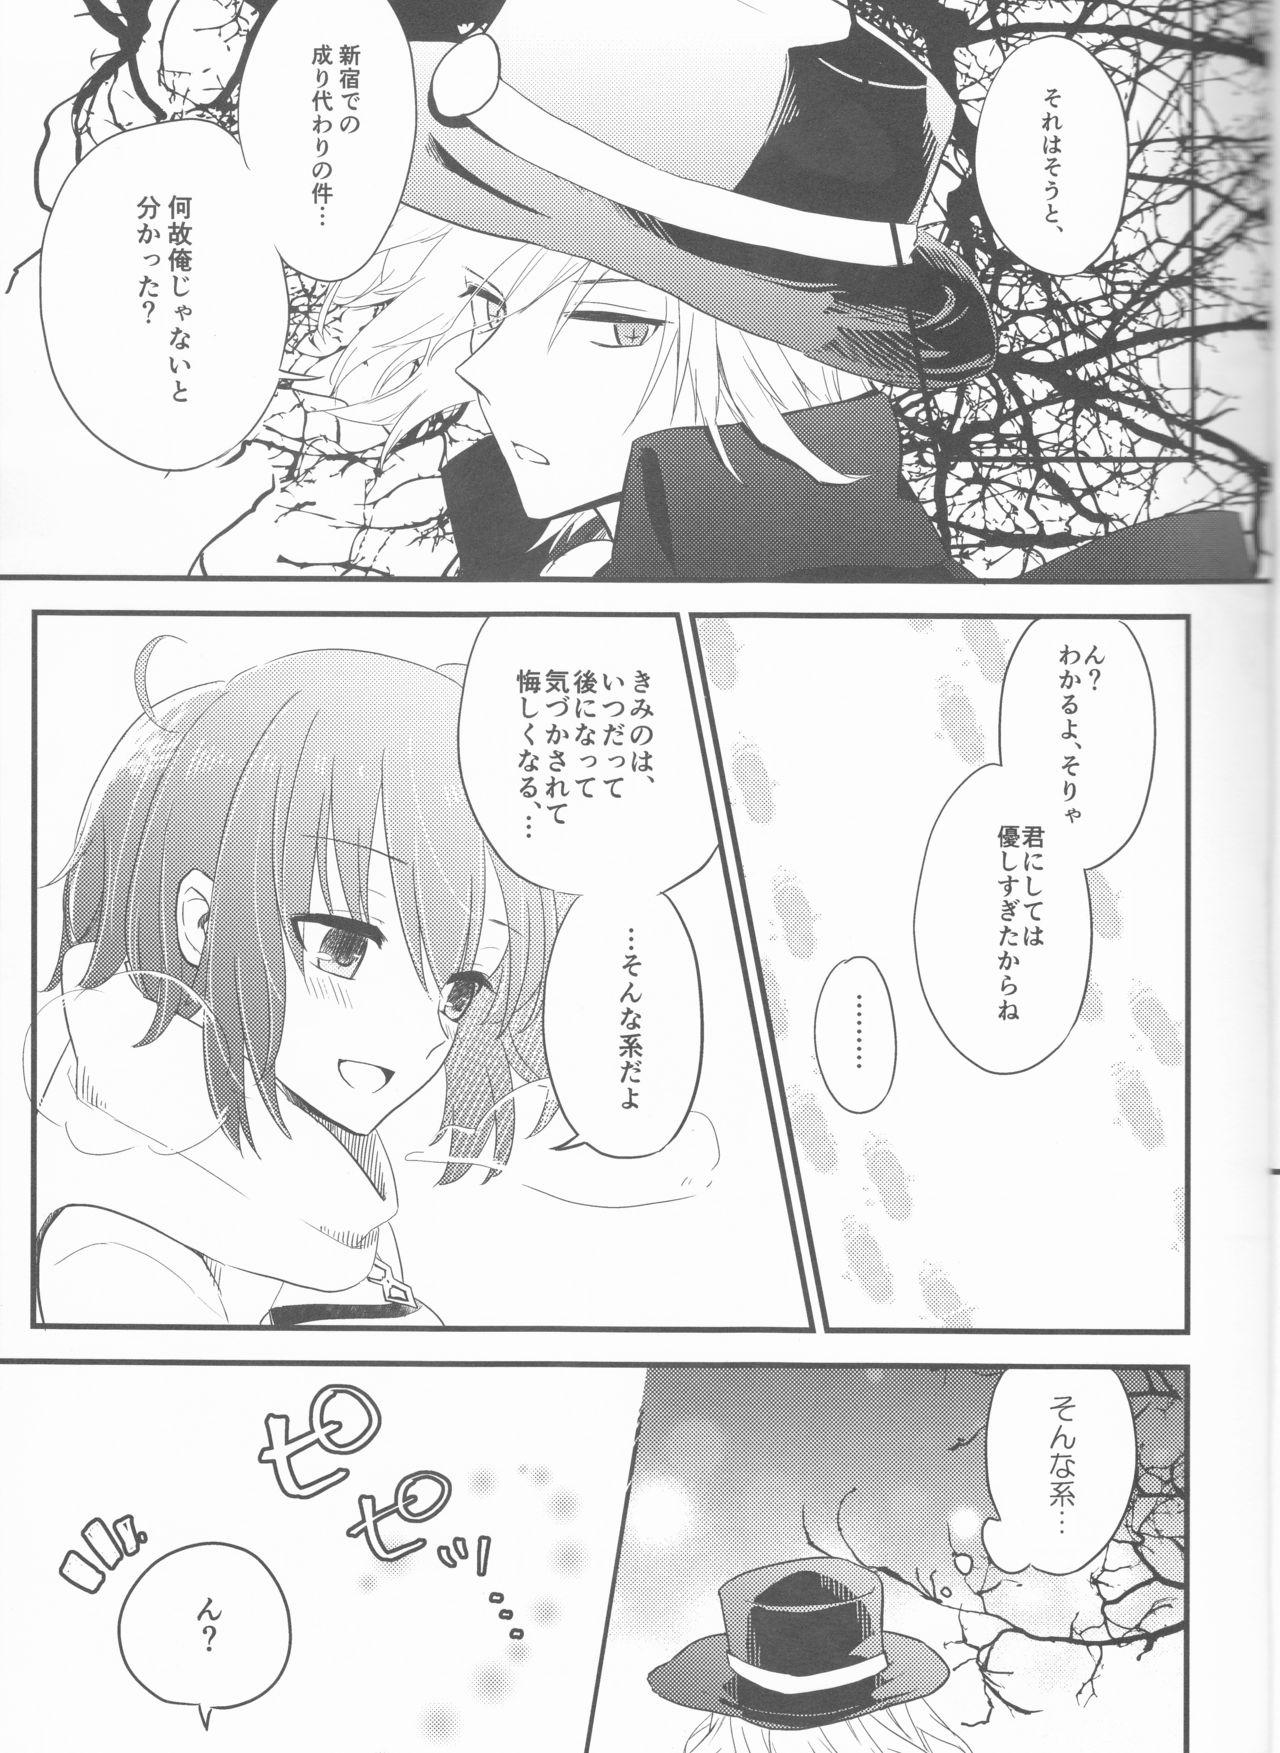 4some Yume no Ondo - Warmth of the dream - Fate grand order Dykes - Page 7